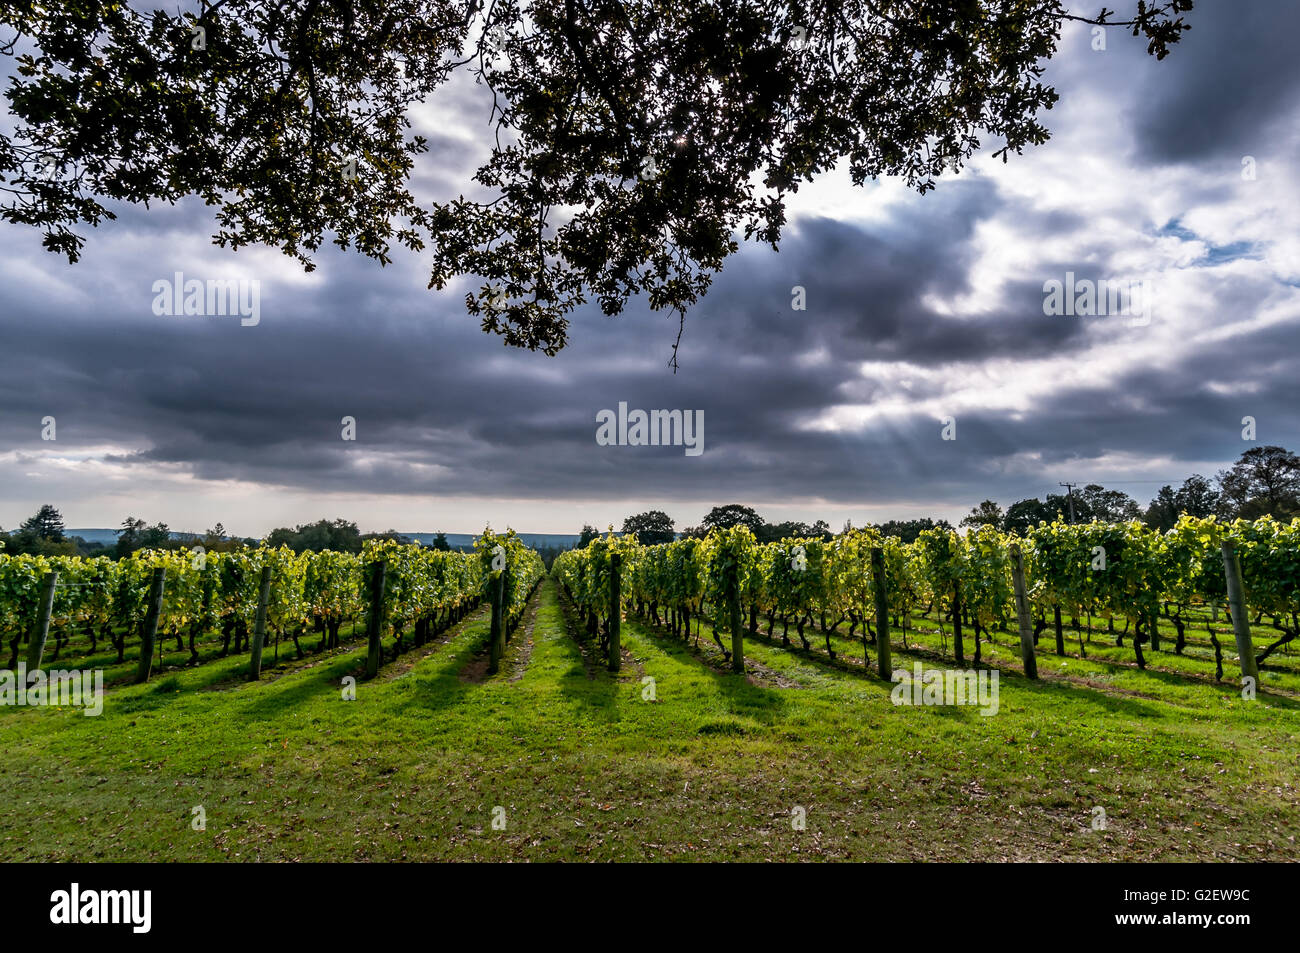 England's largest wine estate, Nyetimber, at West Chiltington in West Sussex. Stock Photo